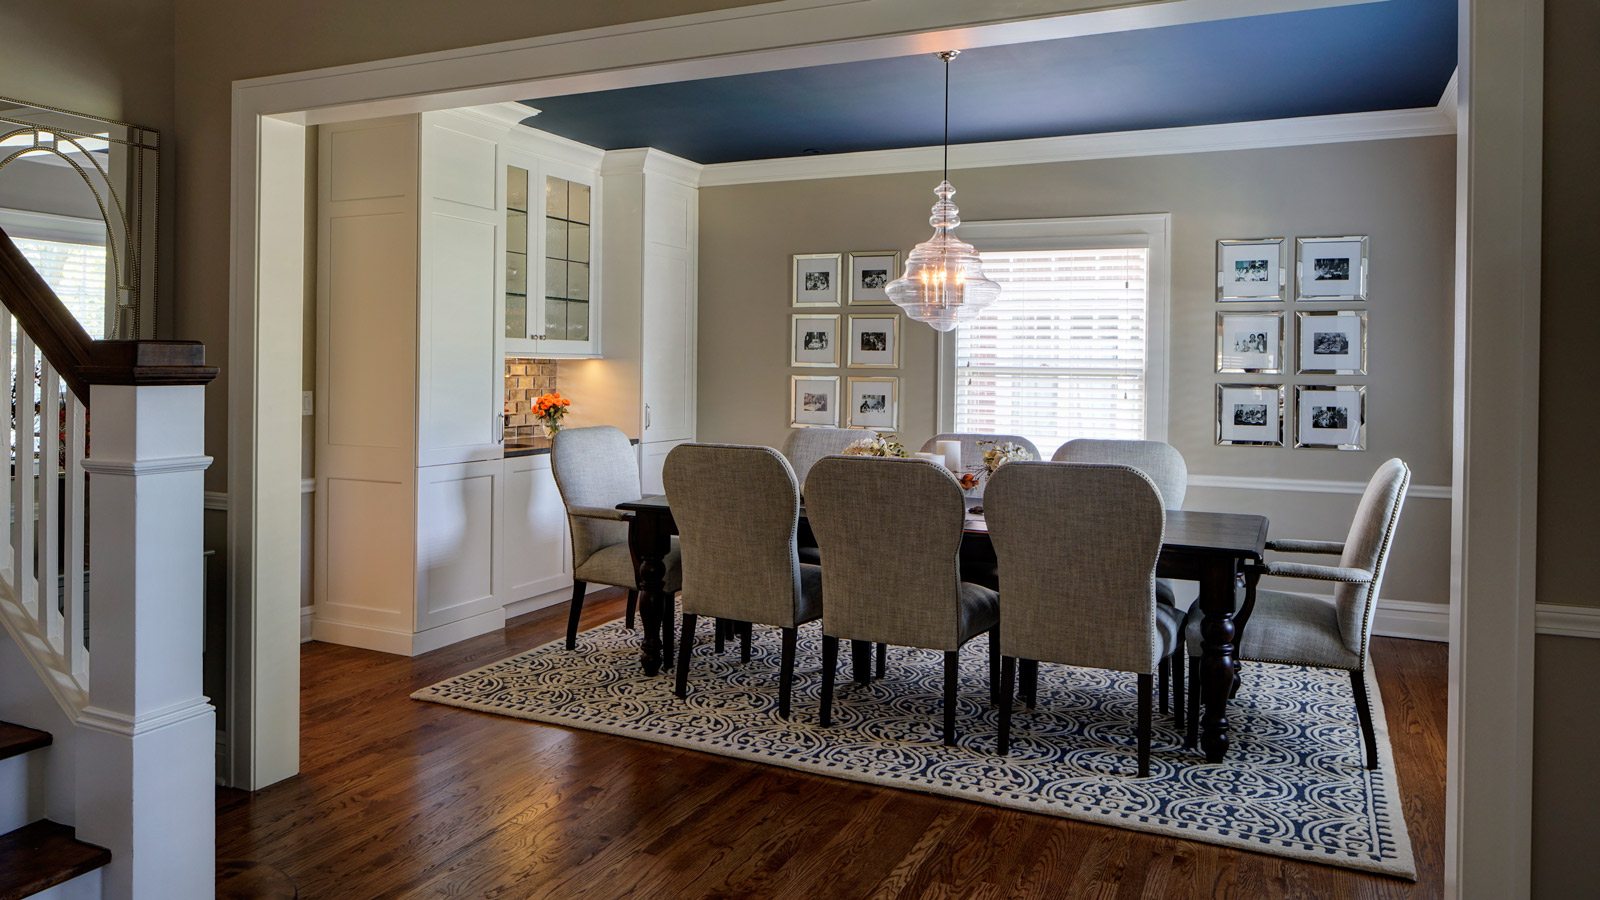 A Dining Room Remodel Perfect For A Large Family Drury Design